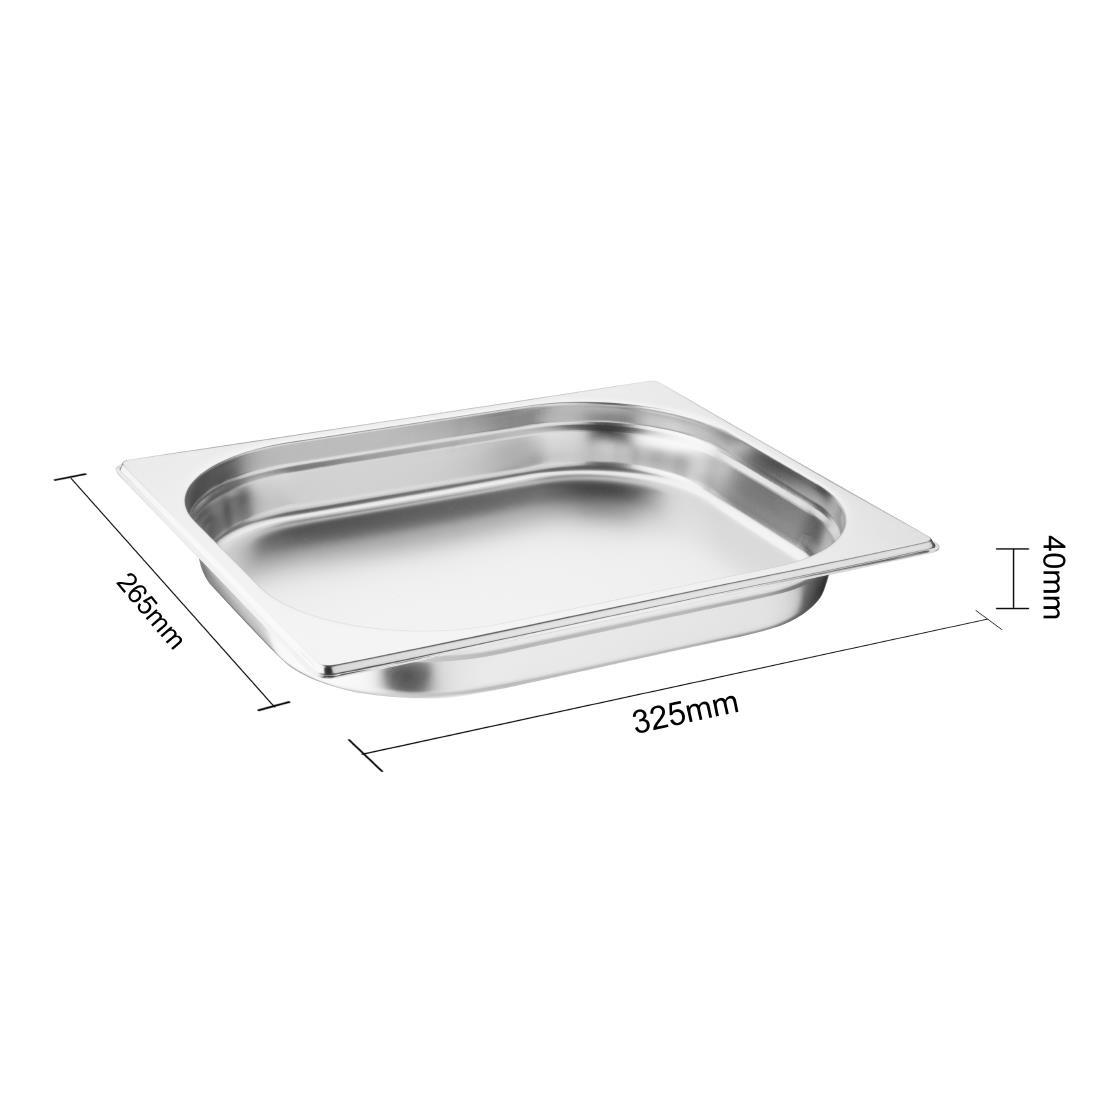 Vogue Stainless Steel 1/2 Gastronorm Pan 40mm - K925  - 7